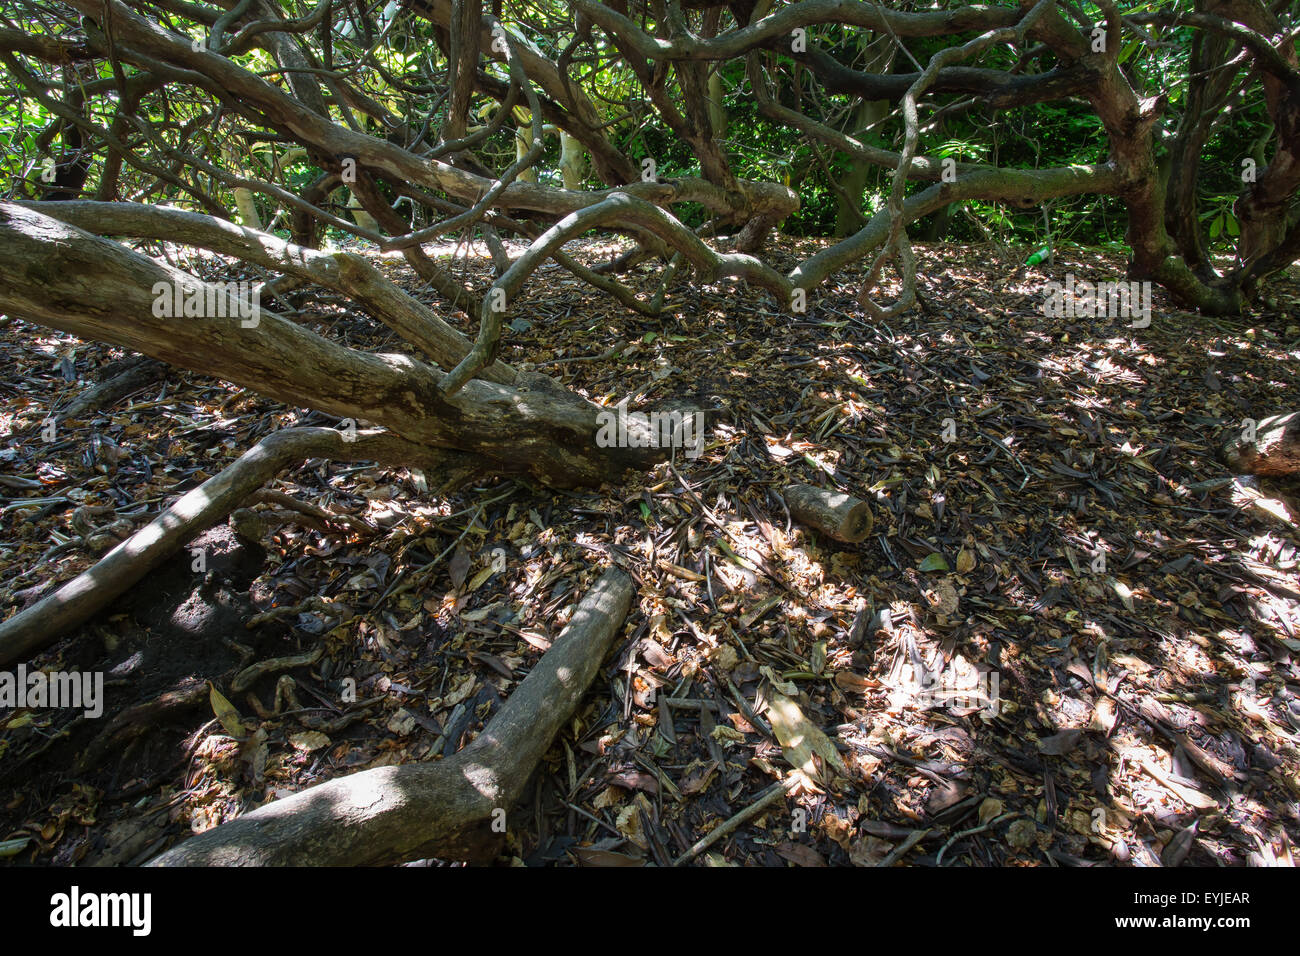 Old twisting tree branches of an old mountain laurel and old brown dry leaves on ground Stock Photo